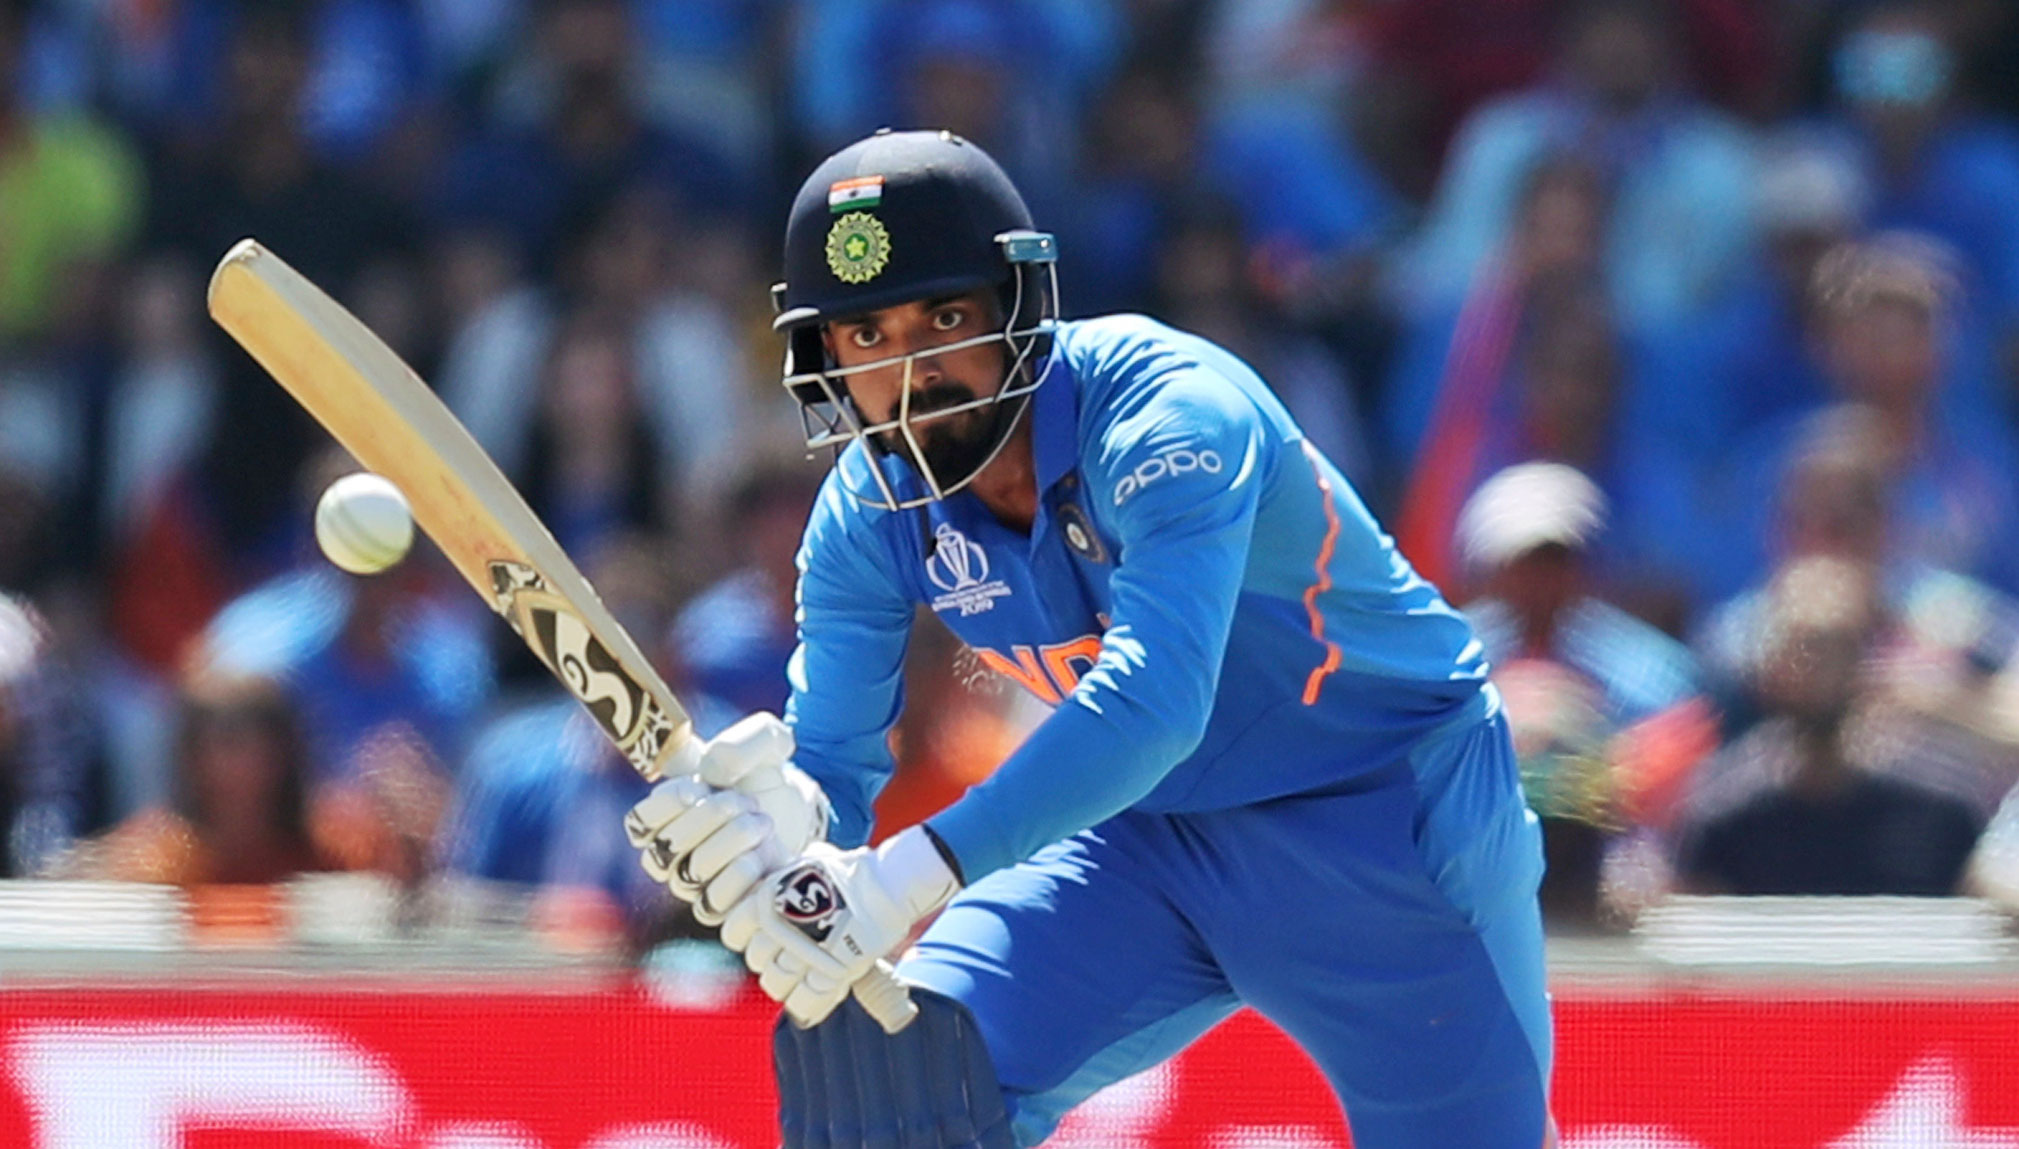 K.L. Rahul bats during the ICC Cricket World Cup match between India and West Indies at Old Trafford in Manchester, England, on June 27, 2019.  